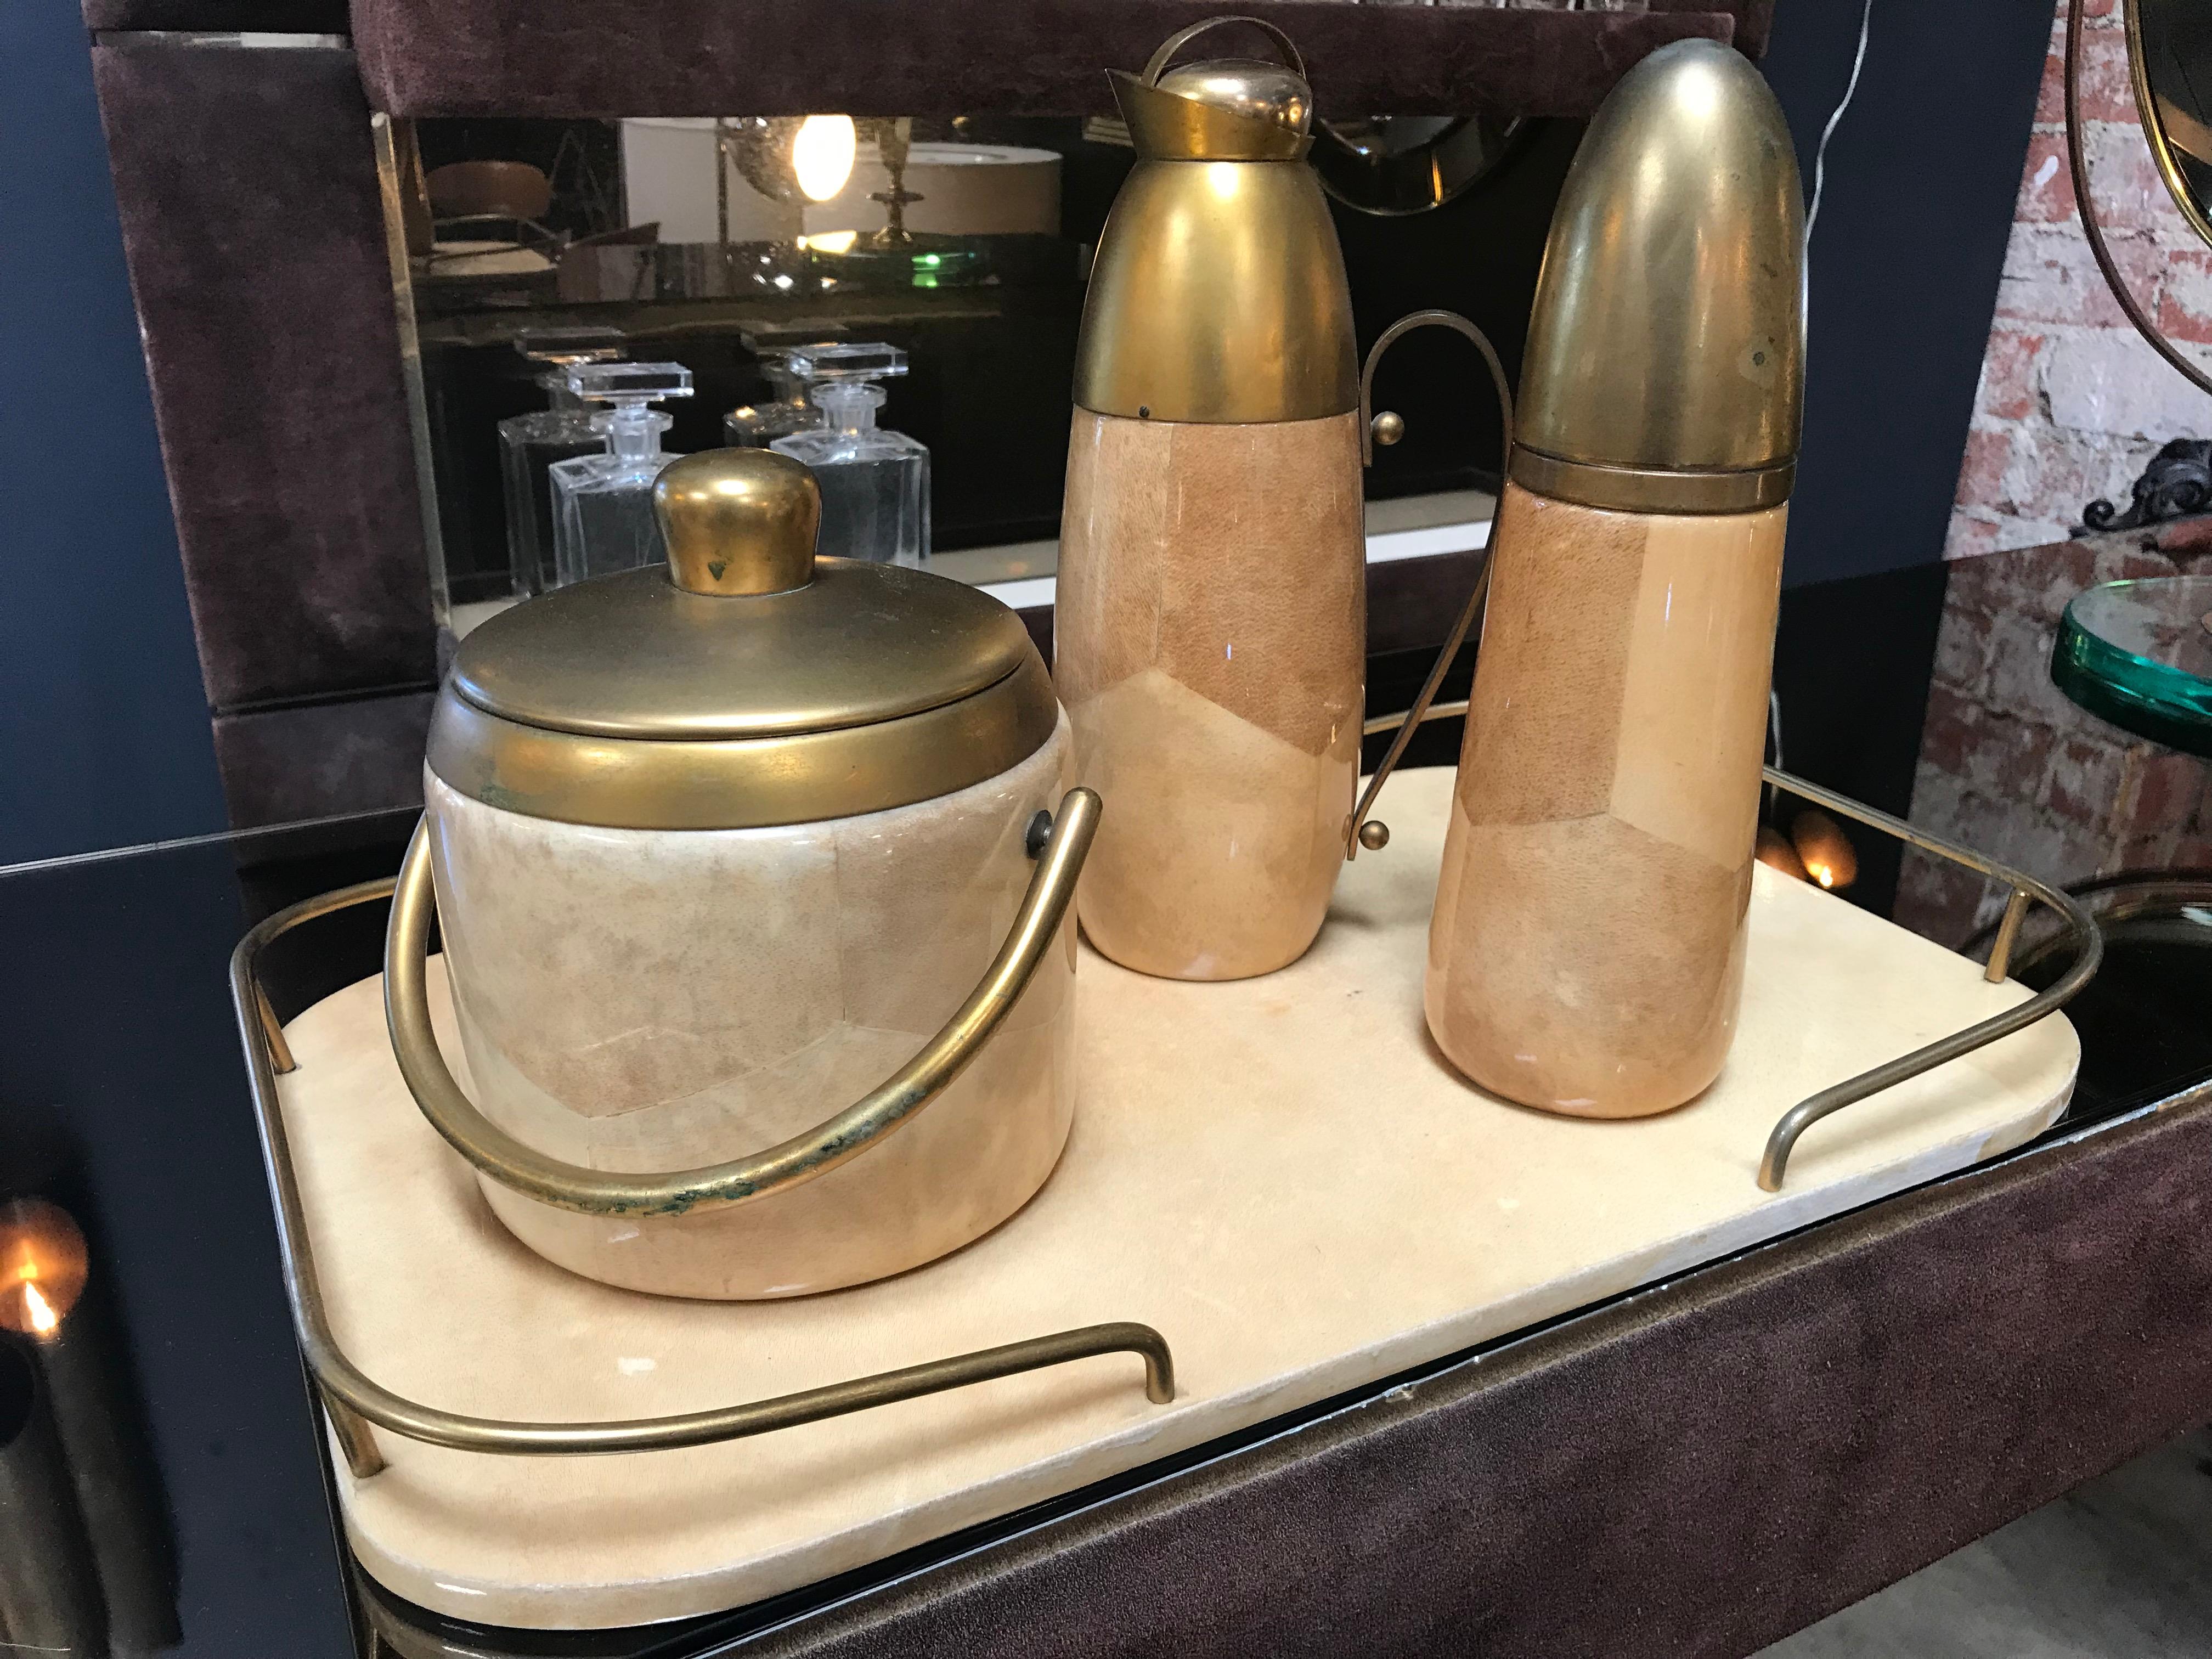 Aldo Tura Barware Set in Brass and Parchment, Italy, 1950s
Set includes a tray with original mirror and sculptural brass handles; a carafe with original matching lid, a shelter and an Ice Bucket.
All original set signed in very good